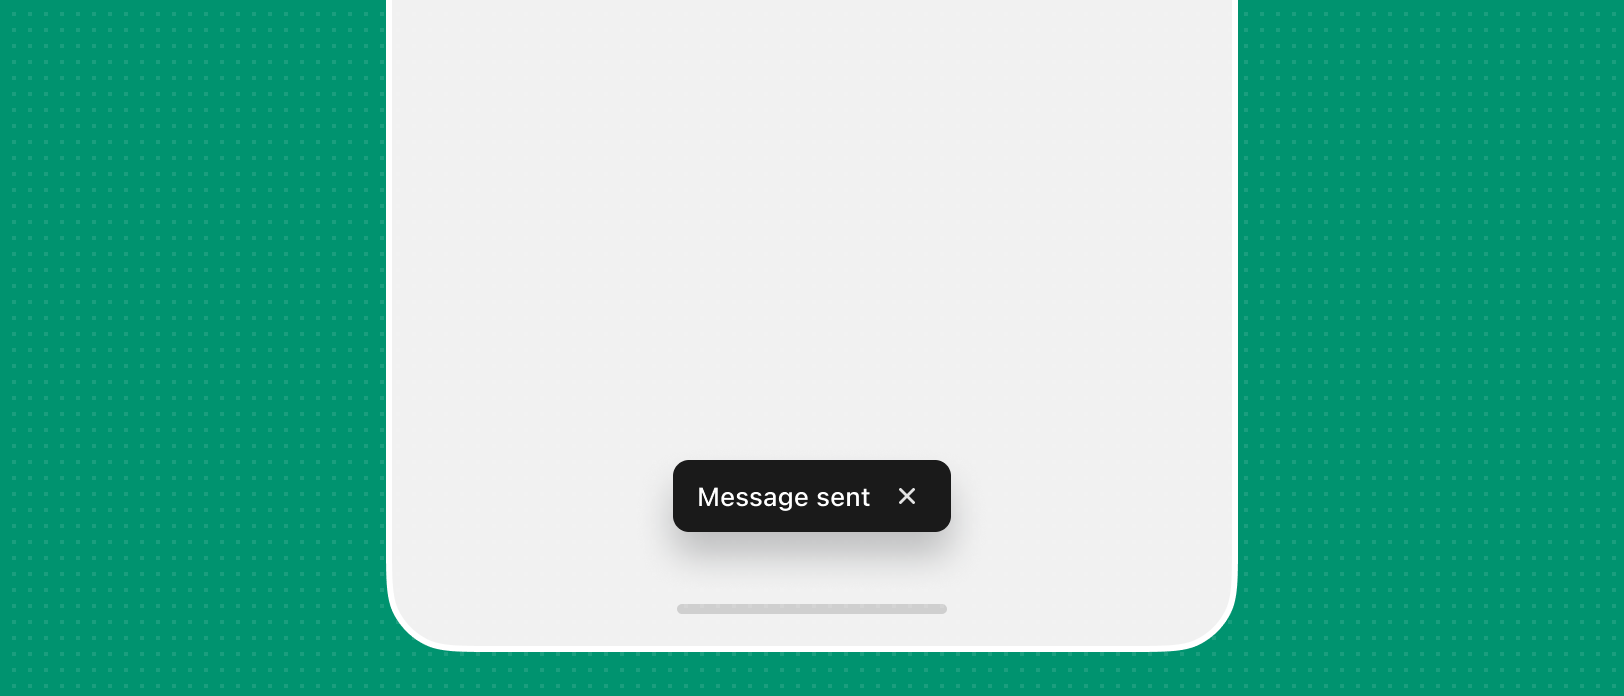 A dismissible toast placed in the bottom center of the app screen that reads "Message sent".